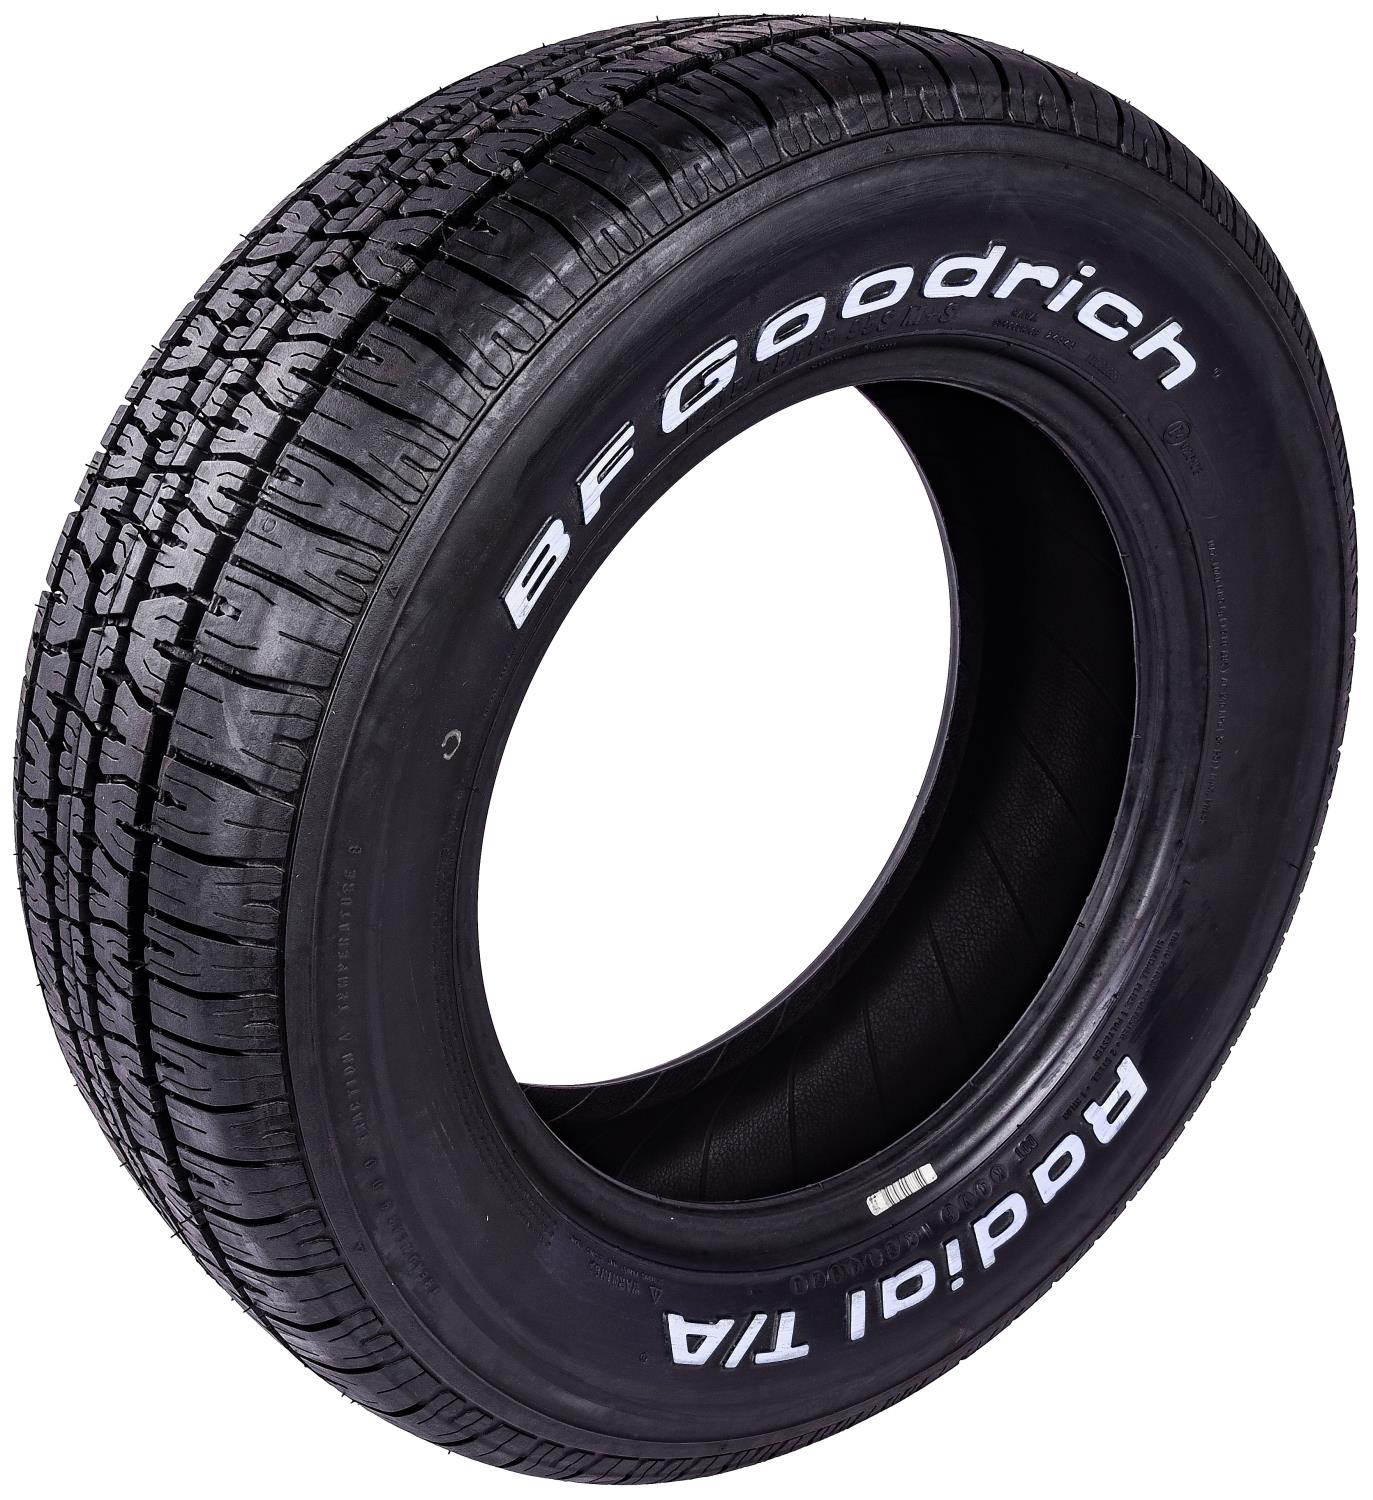 Radial T/A Tire P215/65R15